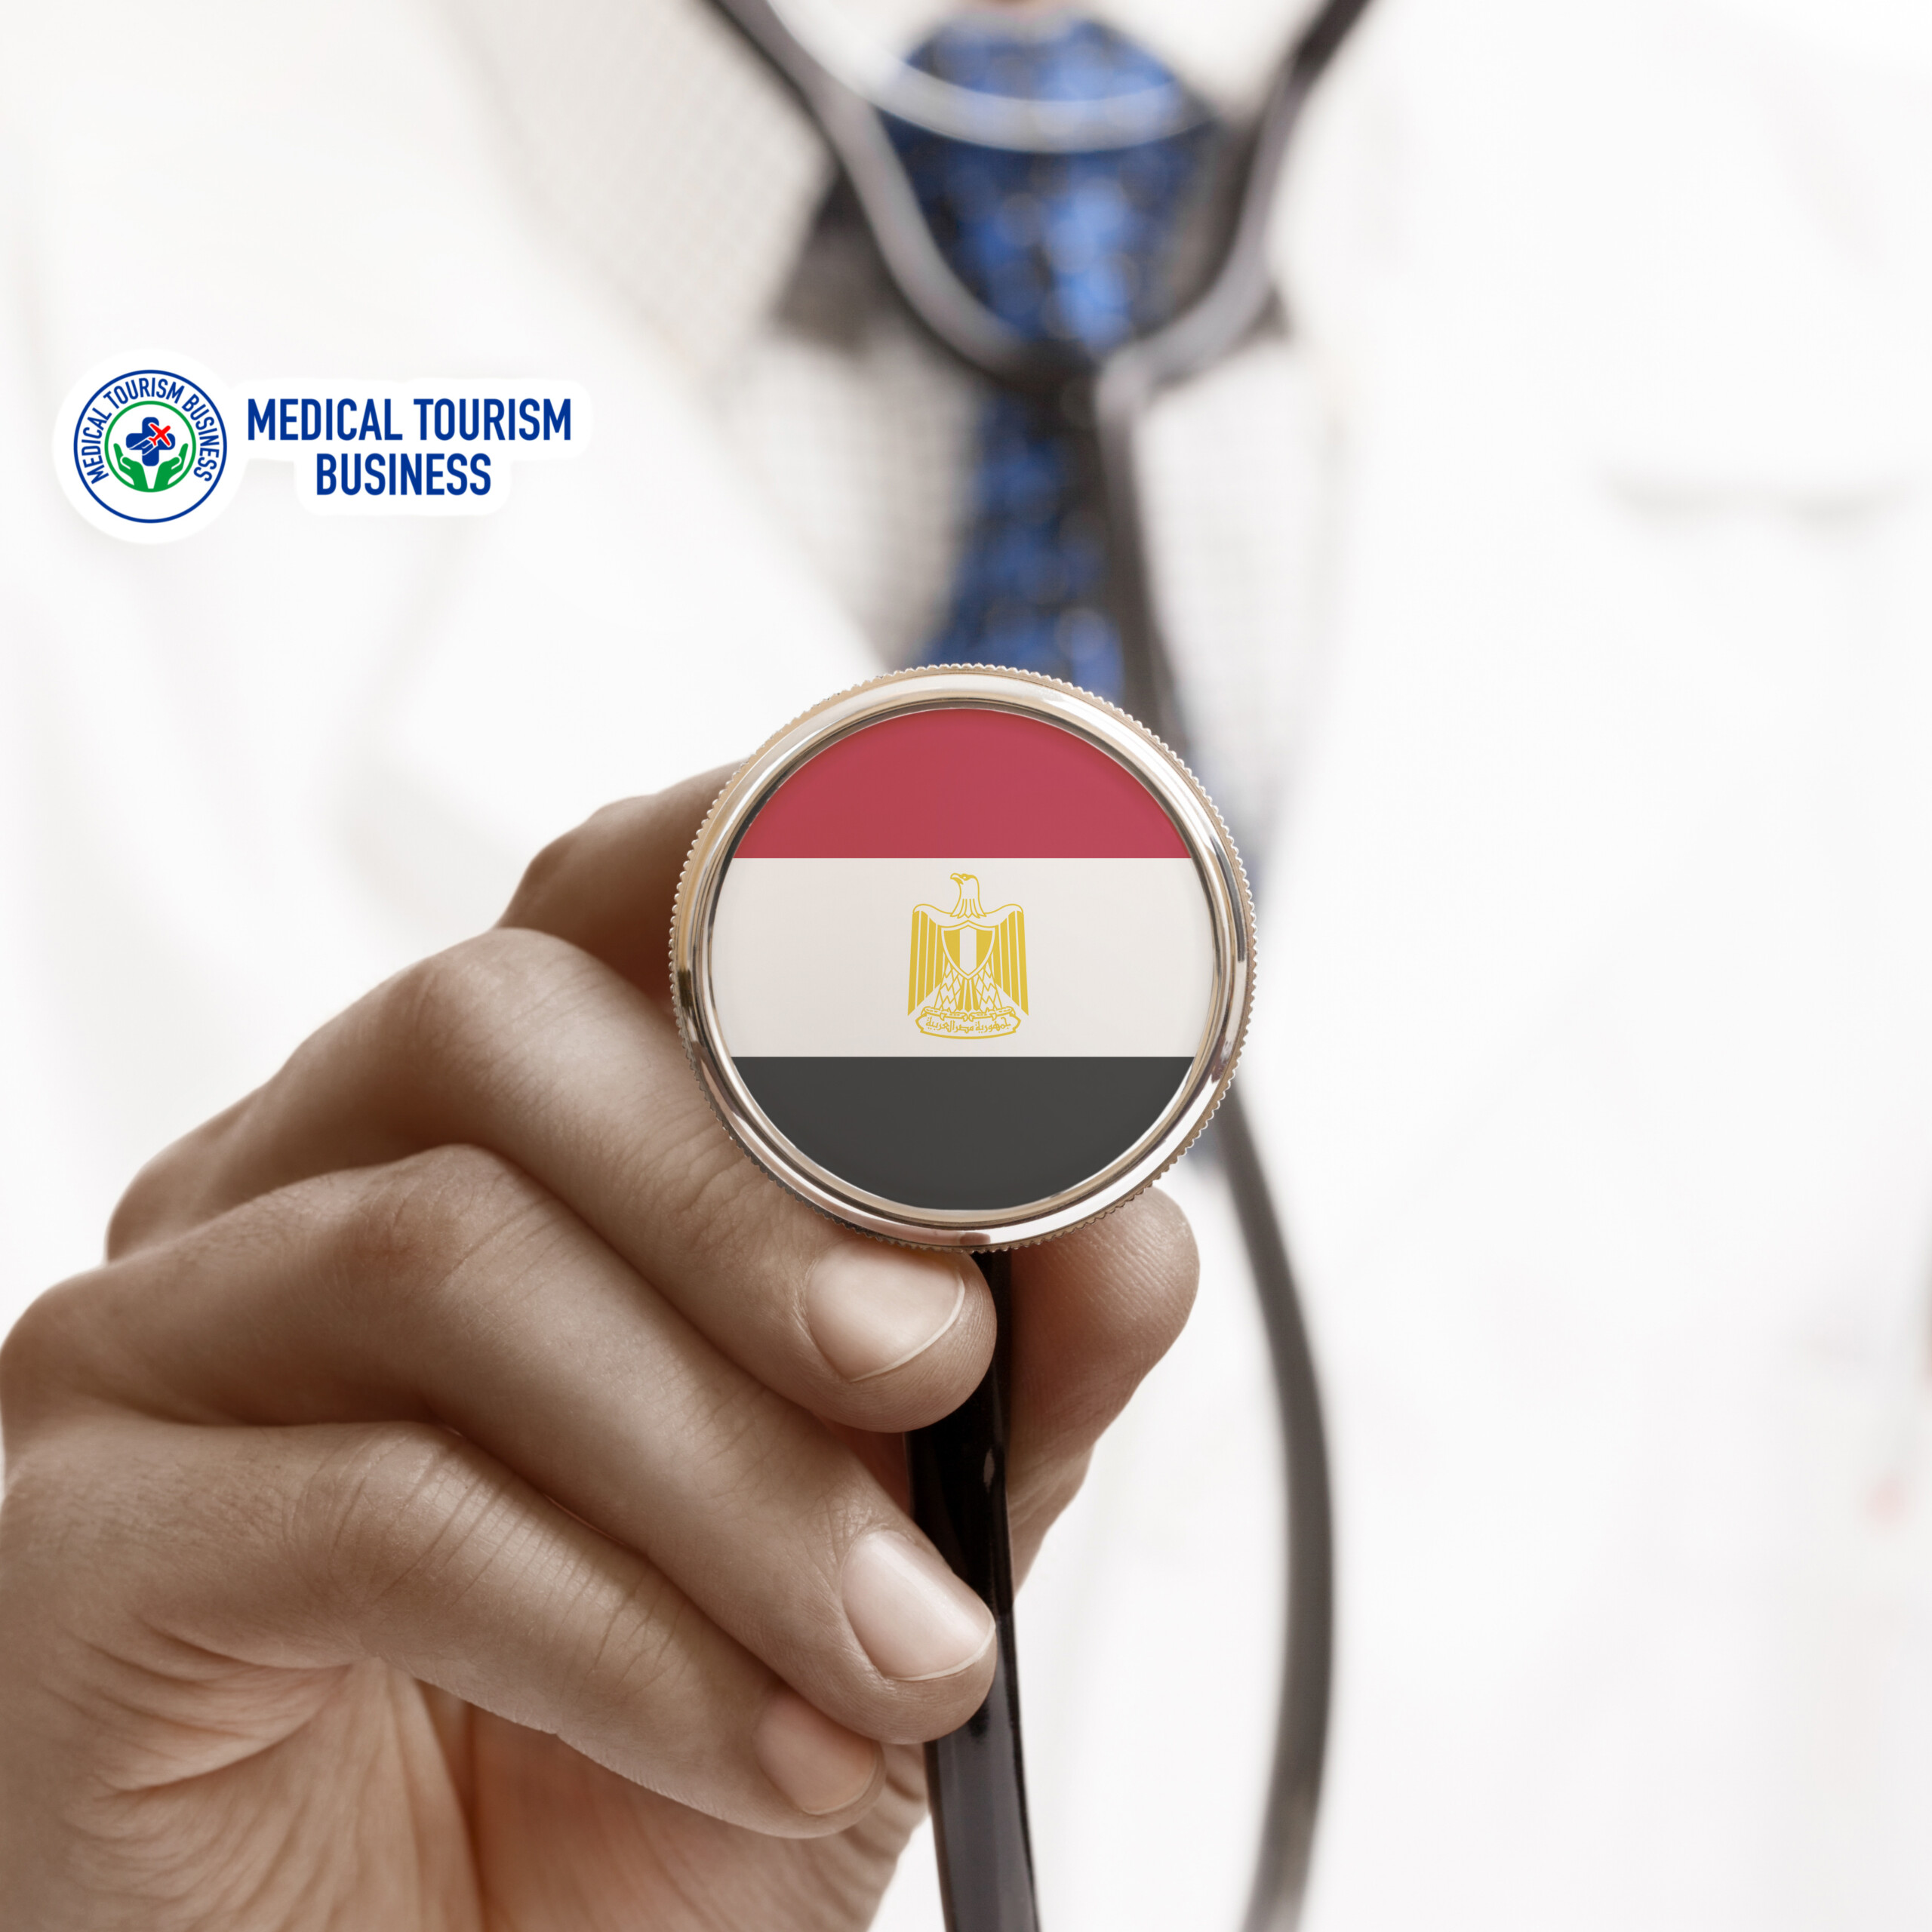 Medical Tourism in Egypt: Analyzing the Market Drivers and Influences